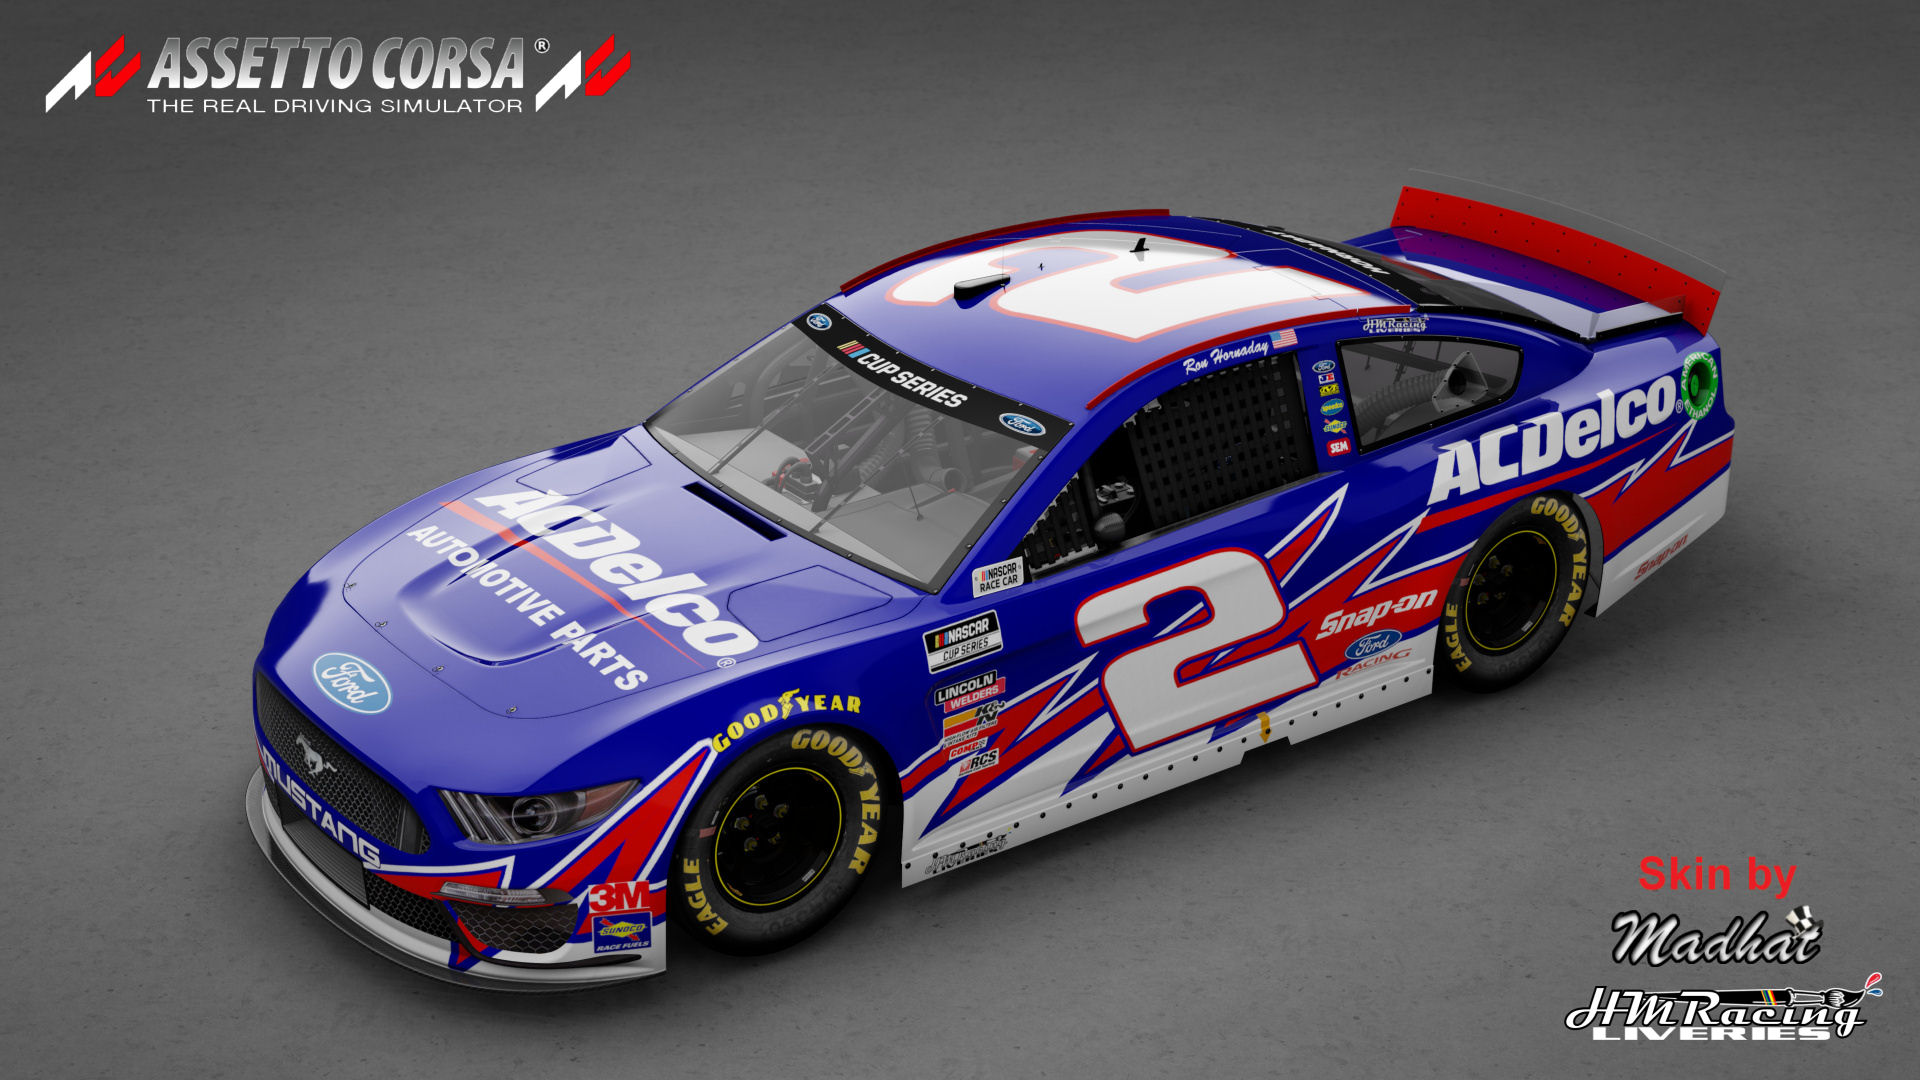 Ron Hornaday No2 ACDelco Mustang Nascar by Madhat HMRacing Liveries 01.jpg